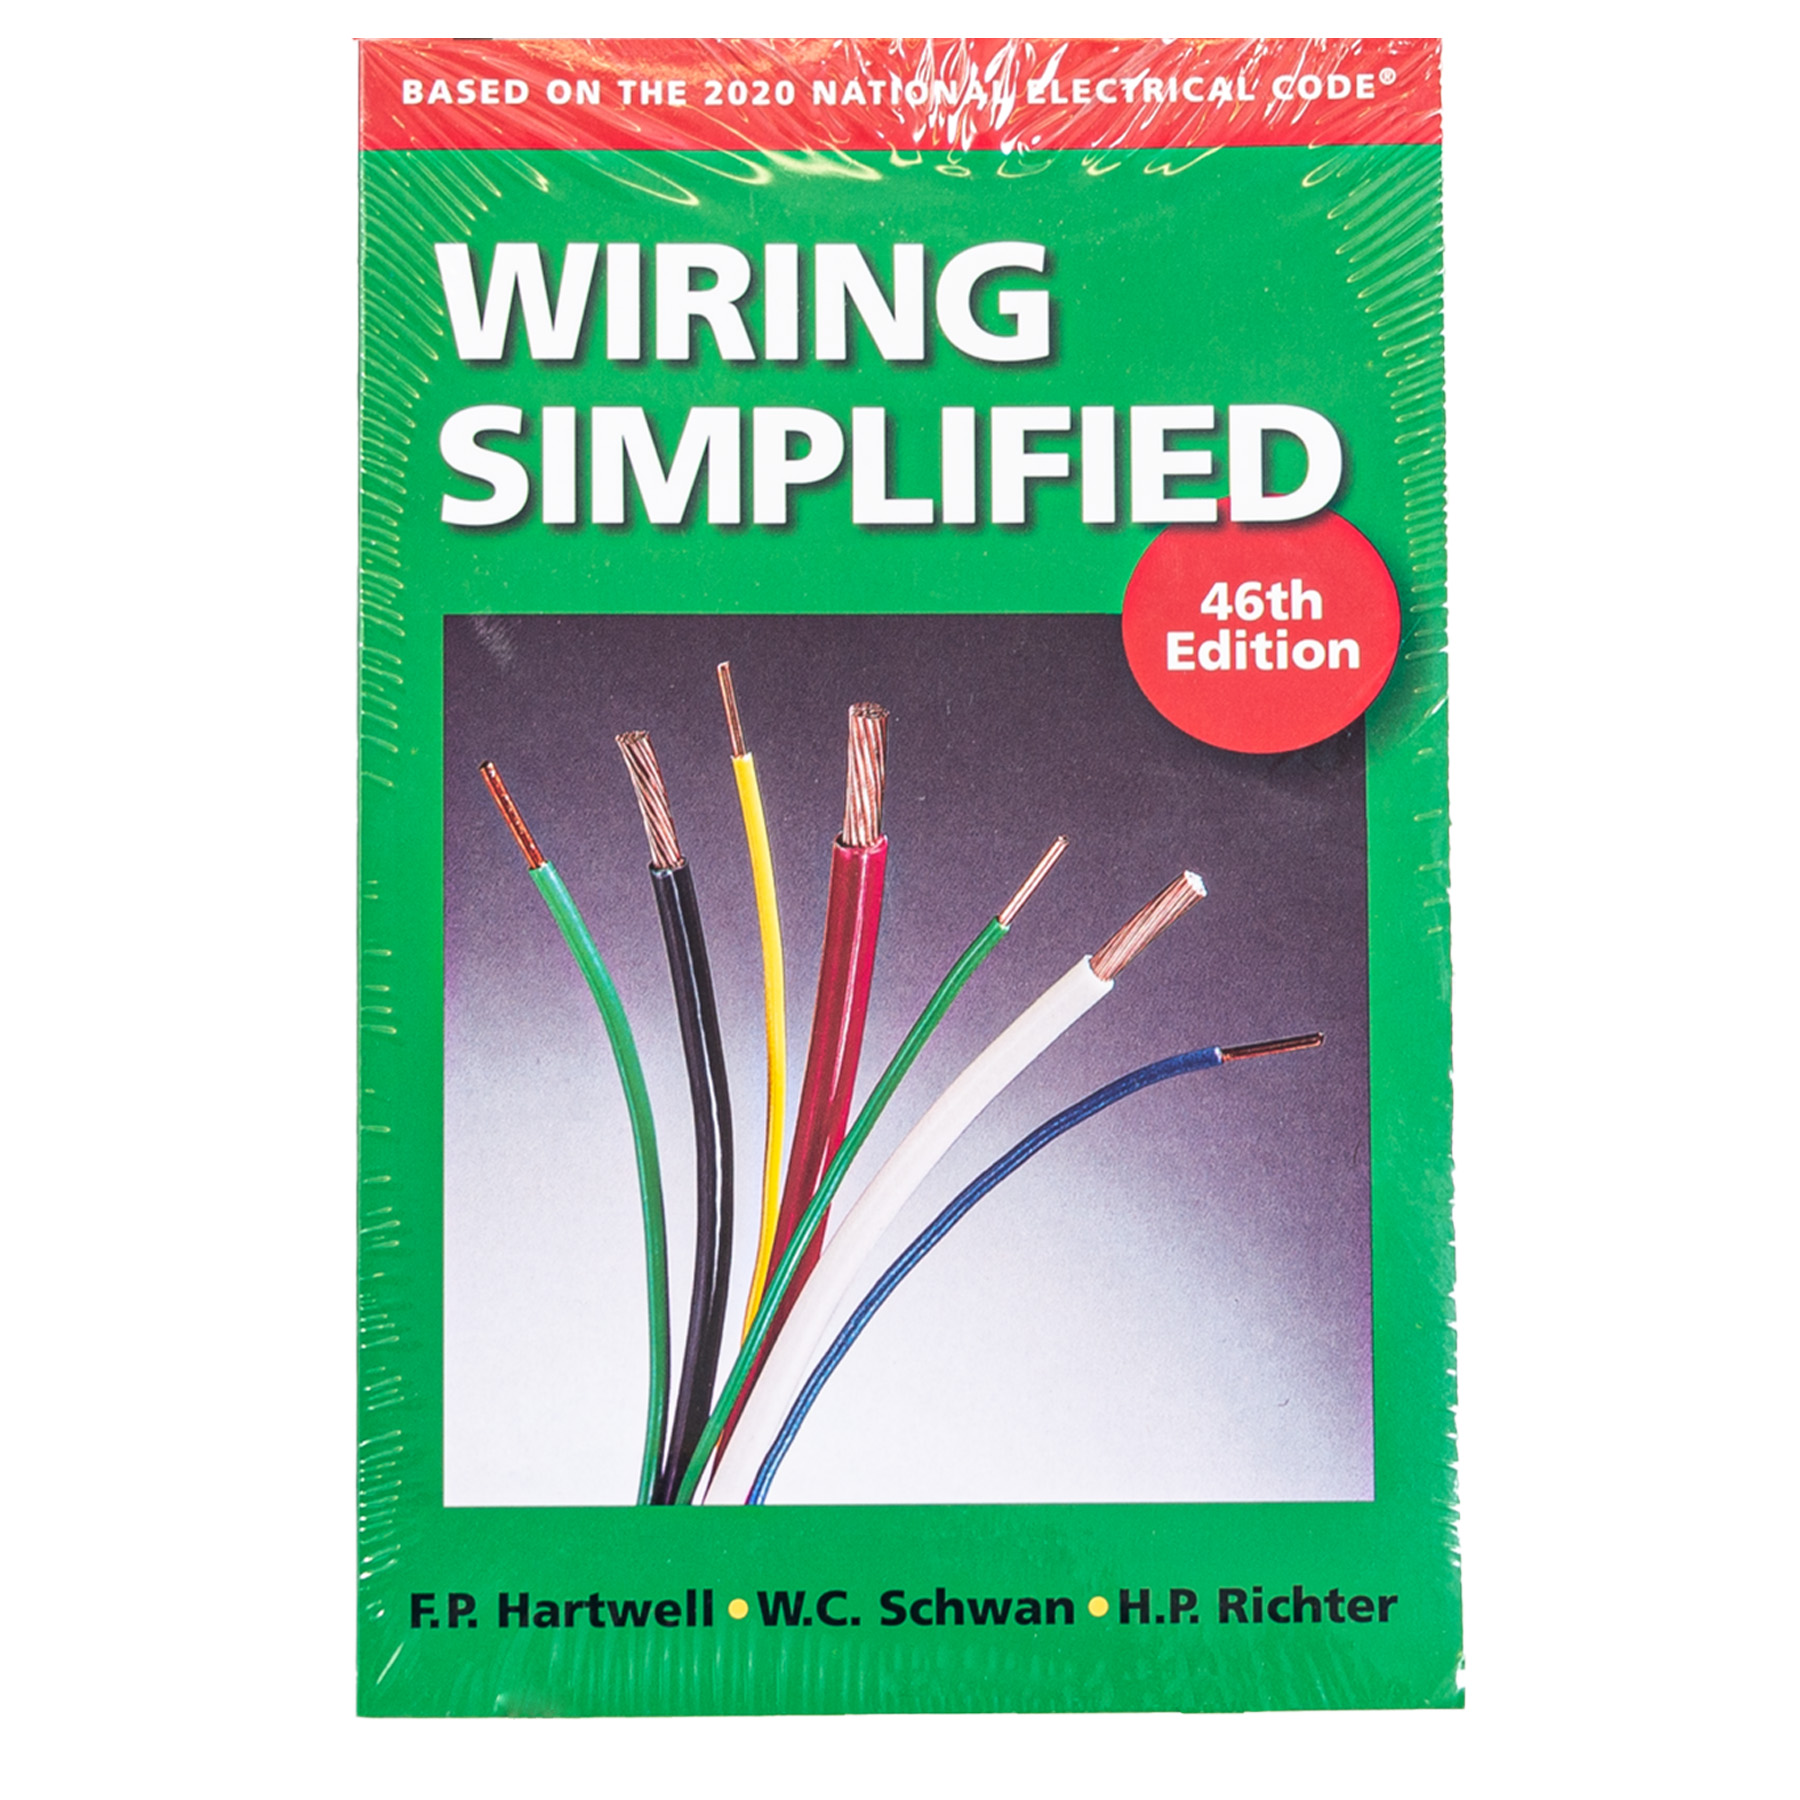 Wiring Simplified 44th Edition - DIY Electrical ...